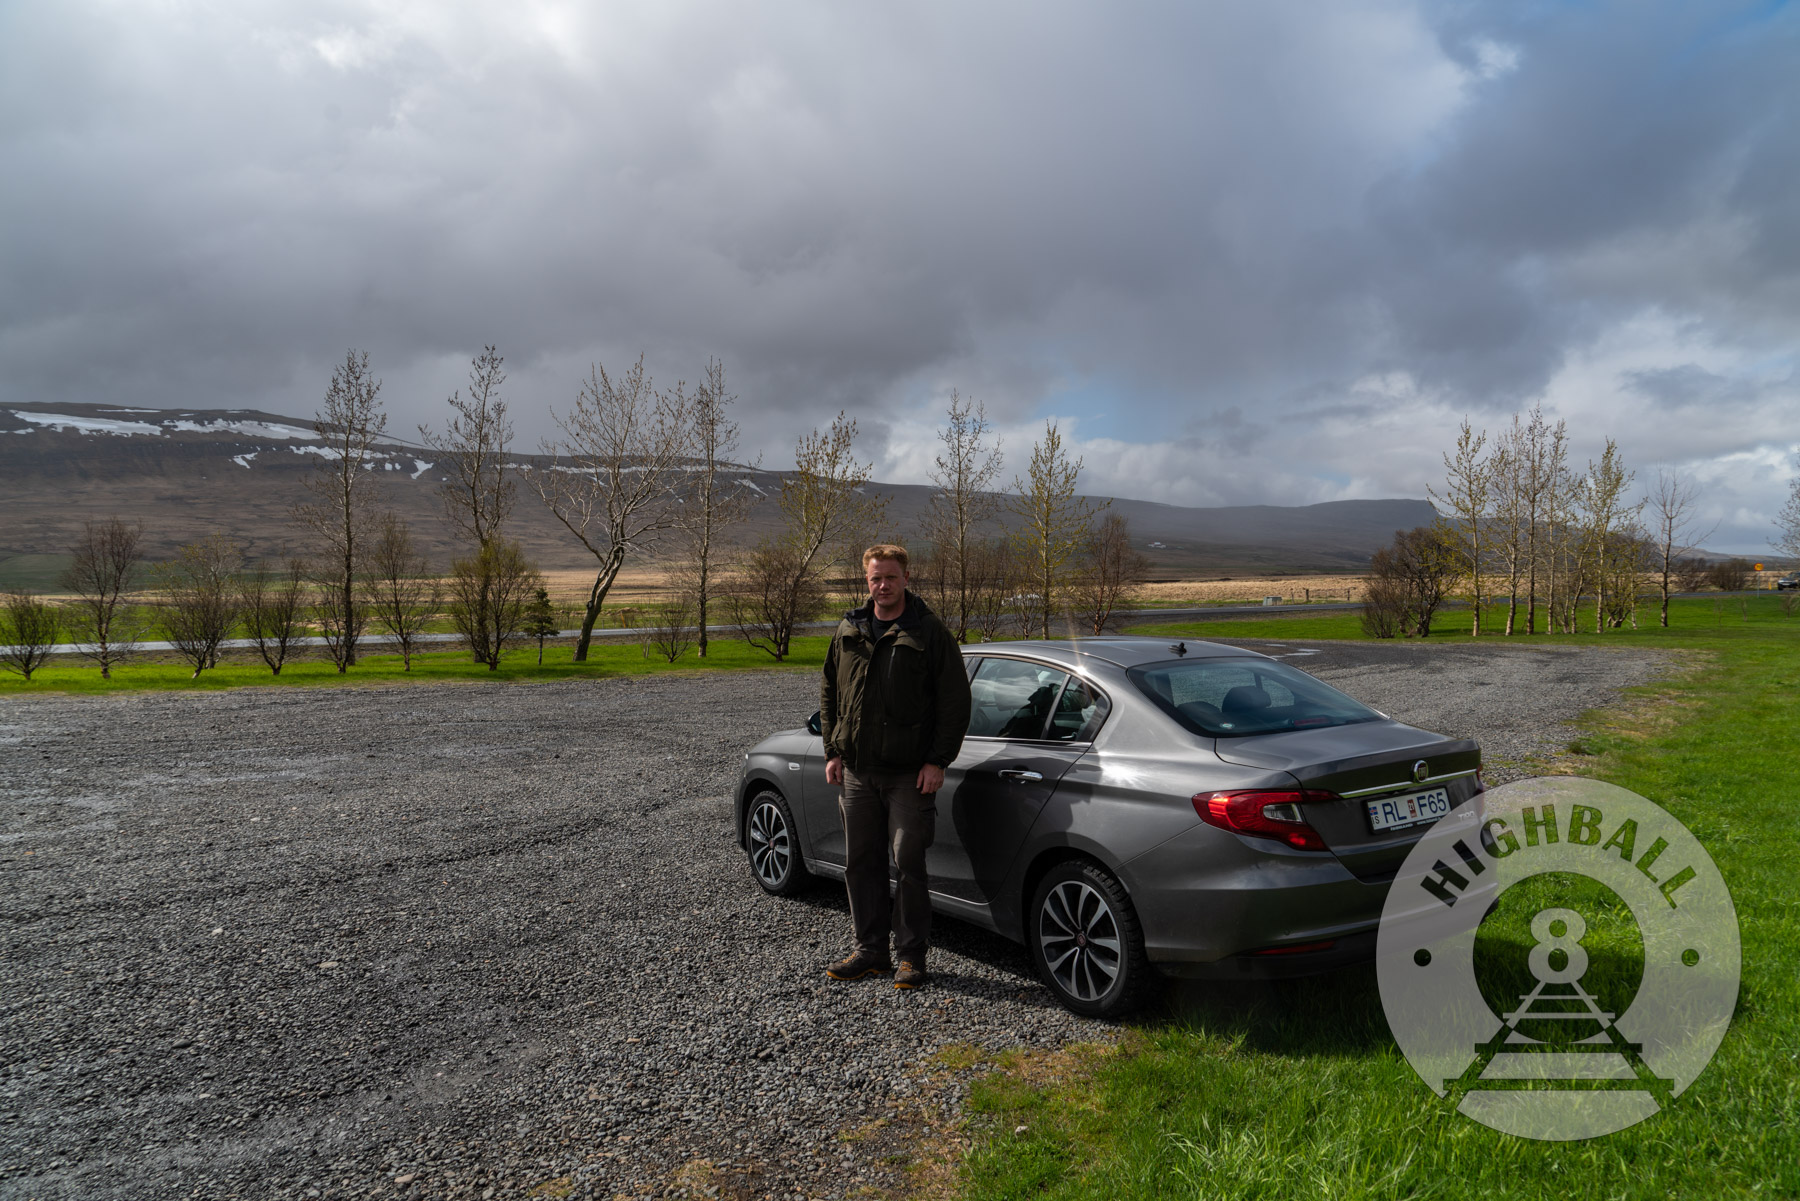 The author and his rental car in Reykholt, Iceland, 2018.